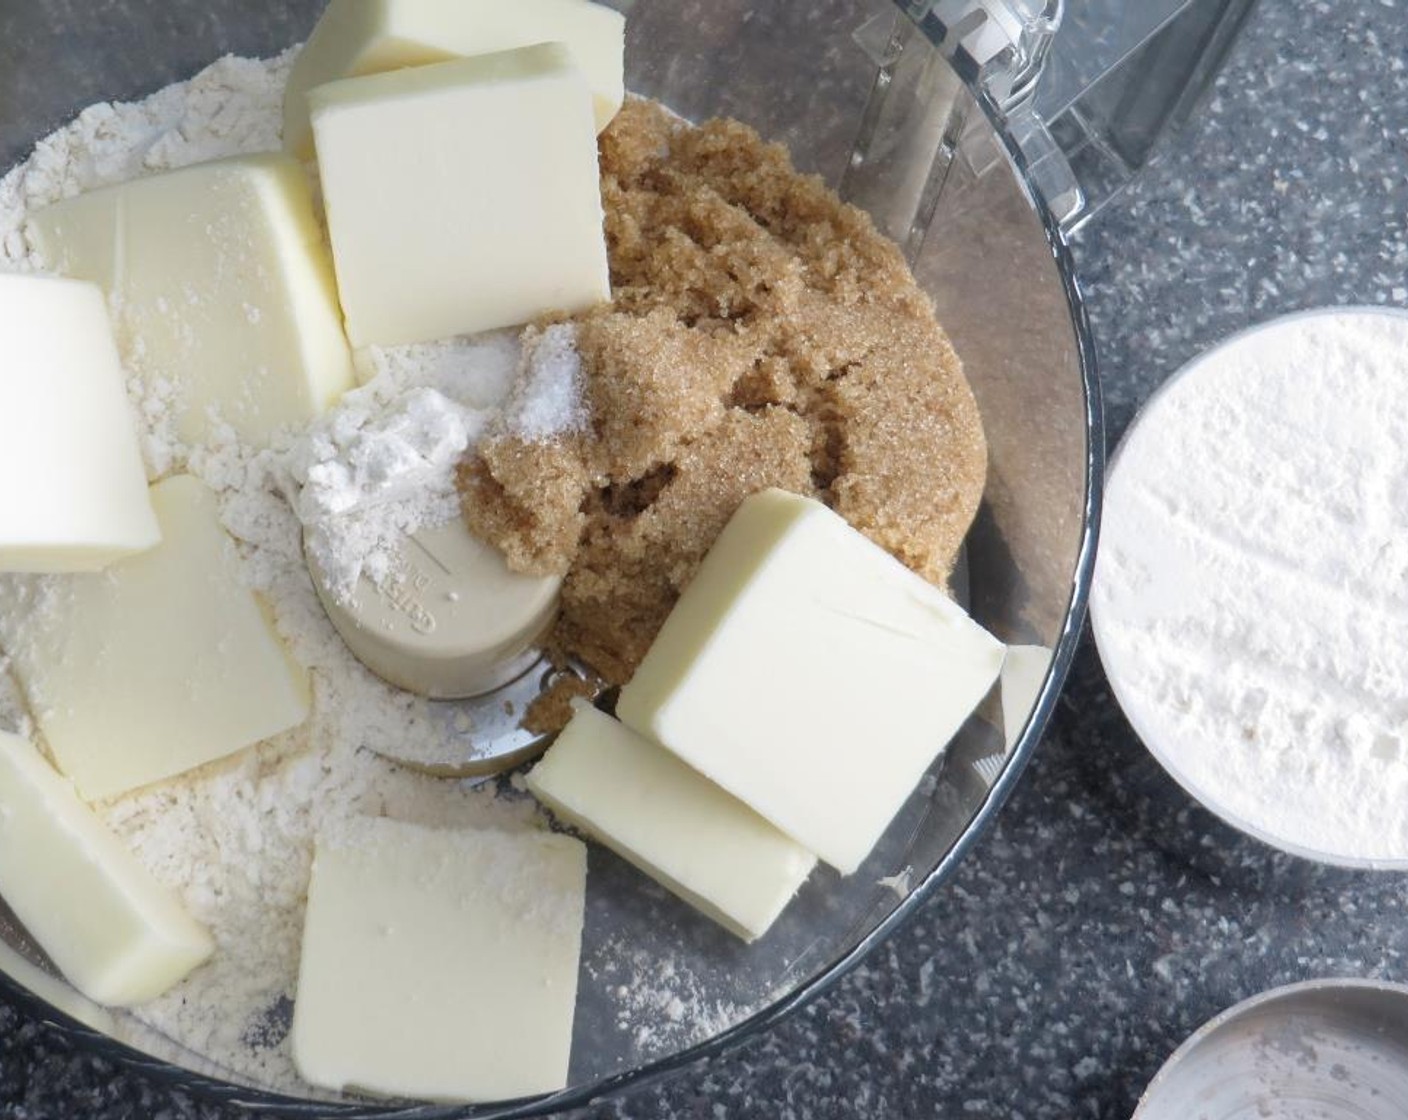 step 4 In a food processor, pulse together the All-Purpose Flour (2 cups), Brown Sugar (1/2 cup) and Salt (1/2 tsp). Add the Unsalted Butter (3/4 cup) and pulse until the mixture comes together into a ball.